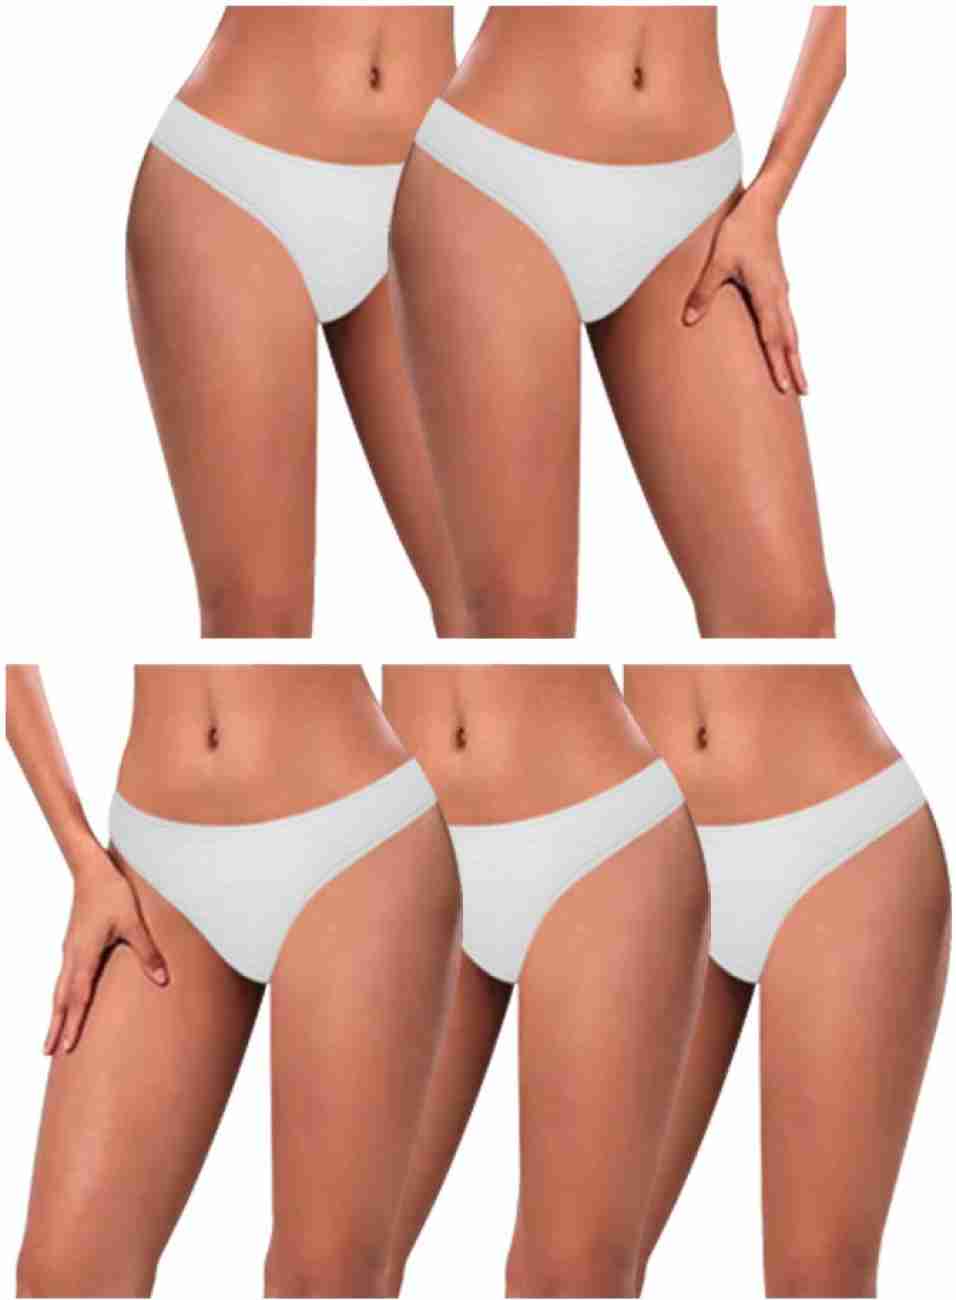 Trawee Disposable Underwear Antimicrobial Women Disposable White Panty -  Buy Trawee Disposable Underwear Antimicrobial Women Disposable White Panty  Online at Best Prices in India